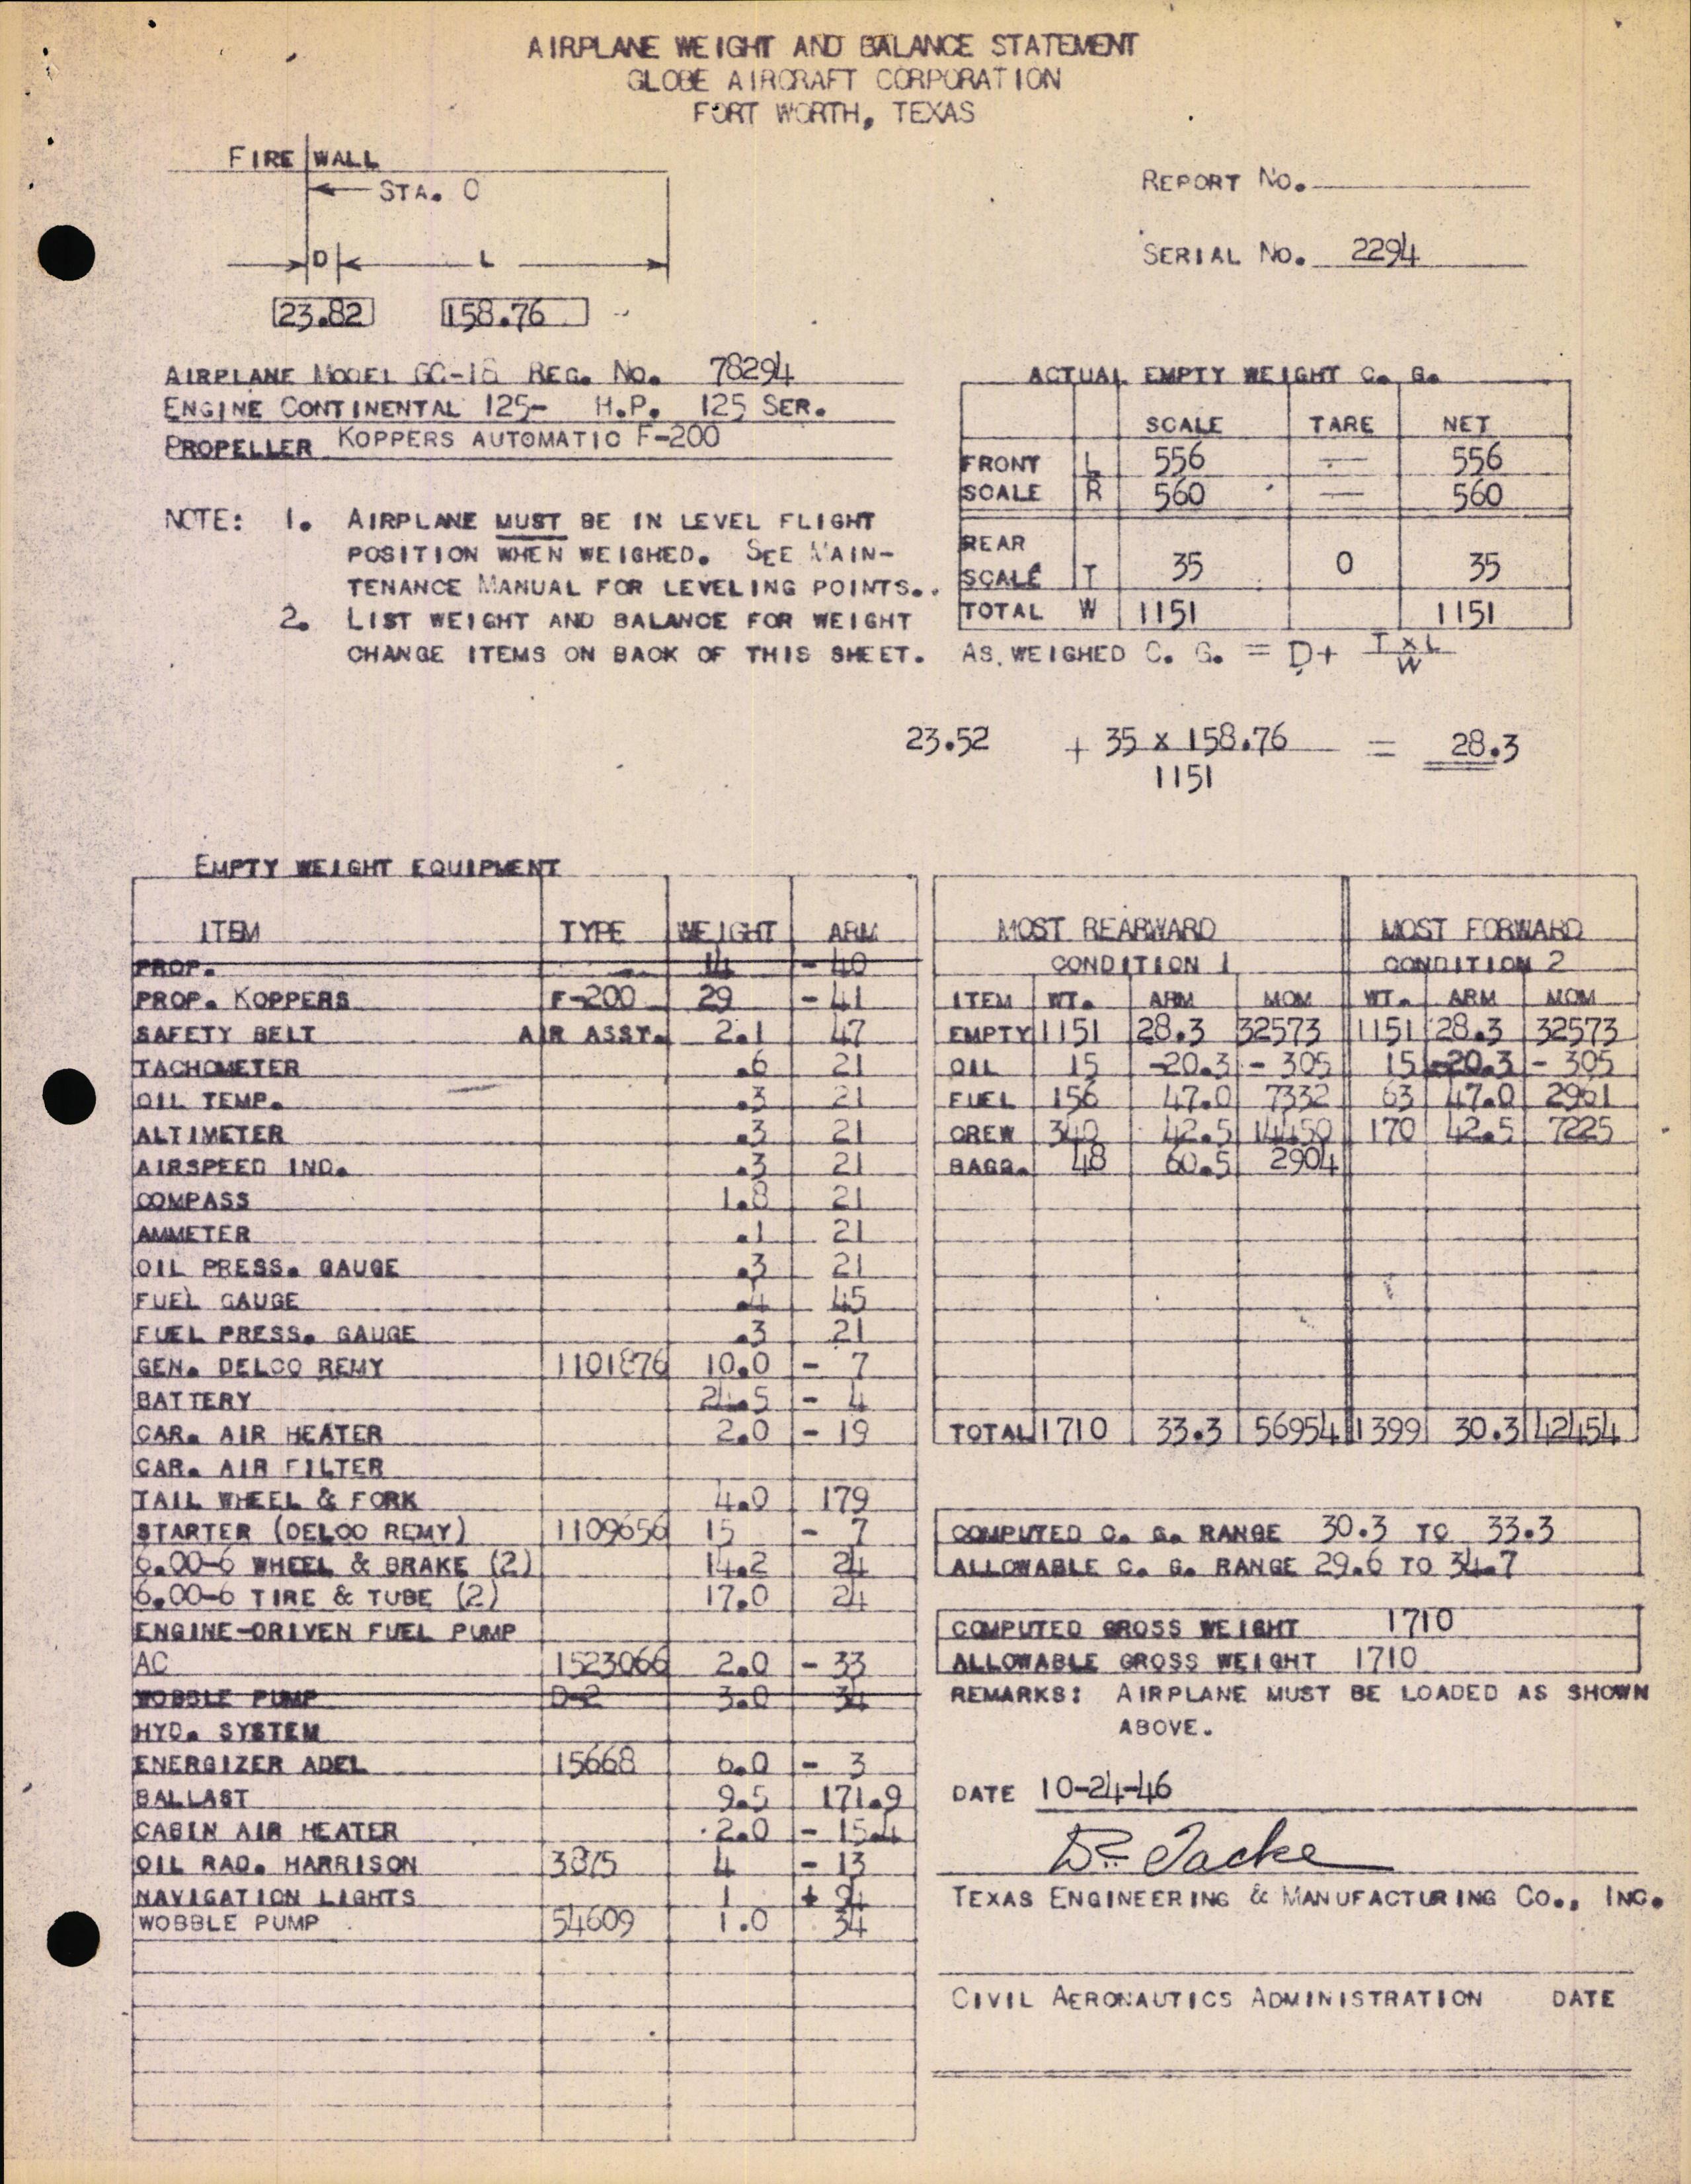 Sample page 4 from AirCorps Library document: Technical Information for Serial Number 2294